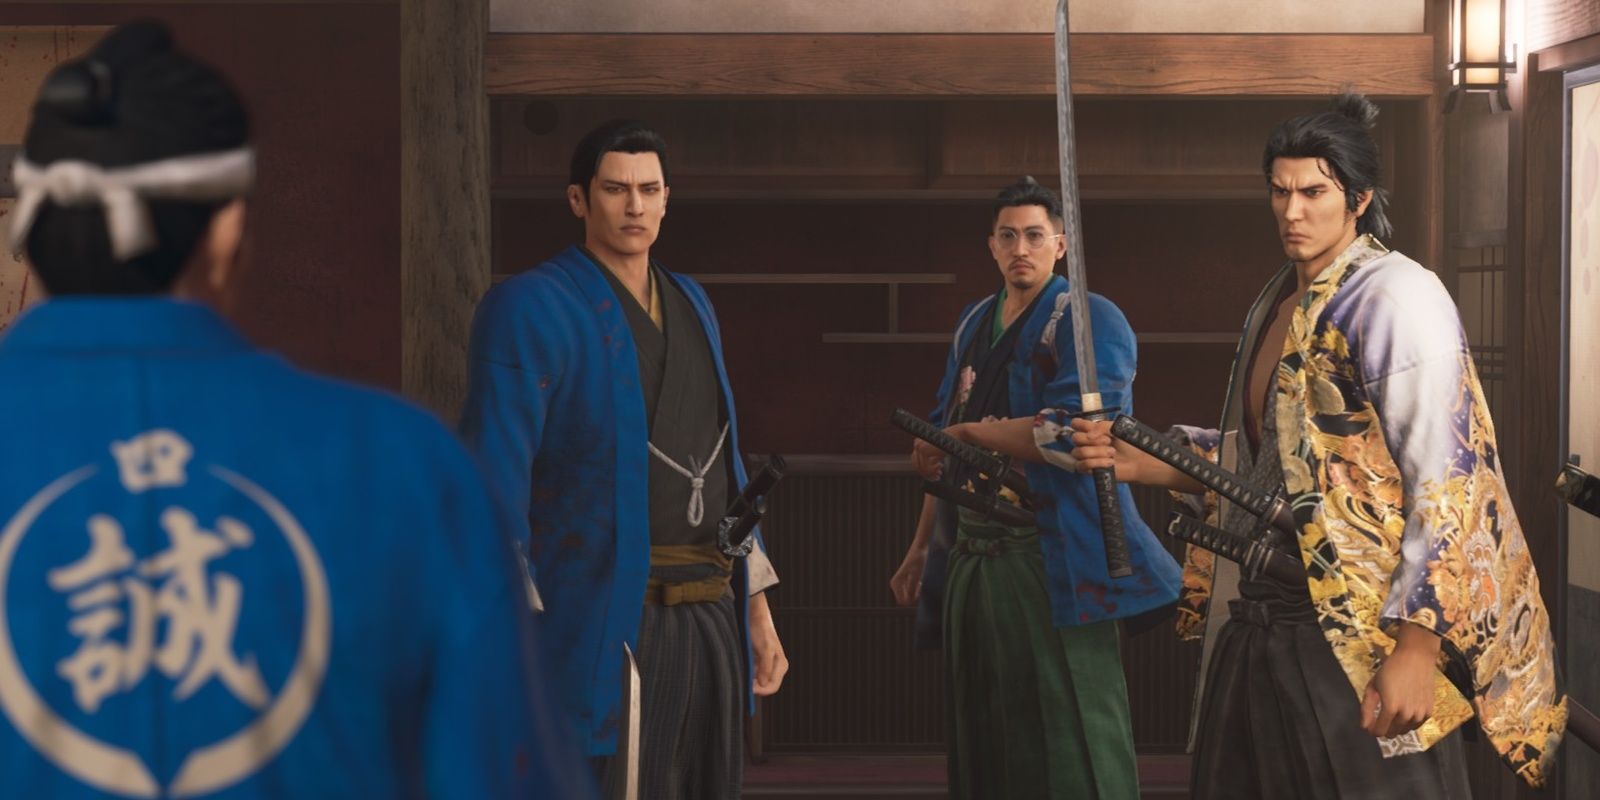 Ryoma and the Shinsengumi Captains prepare to execute a traitor.